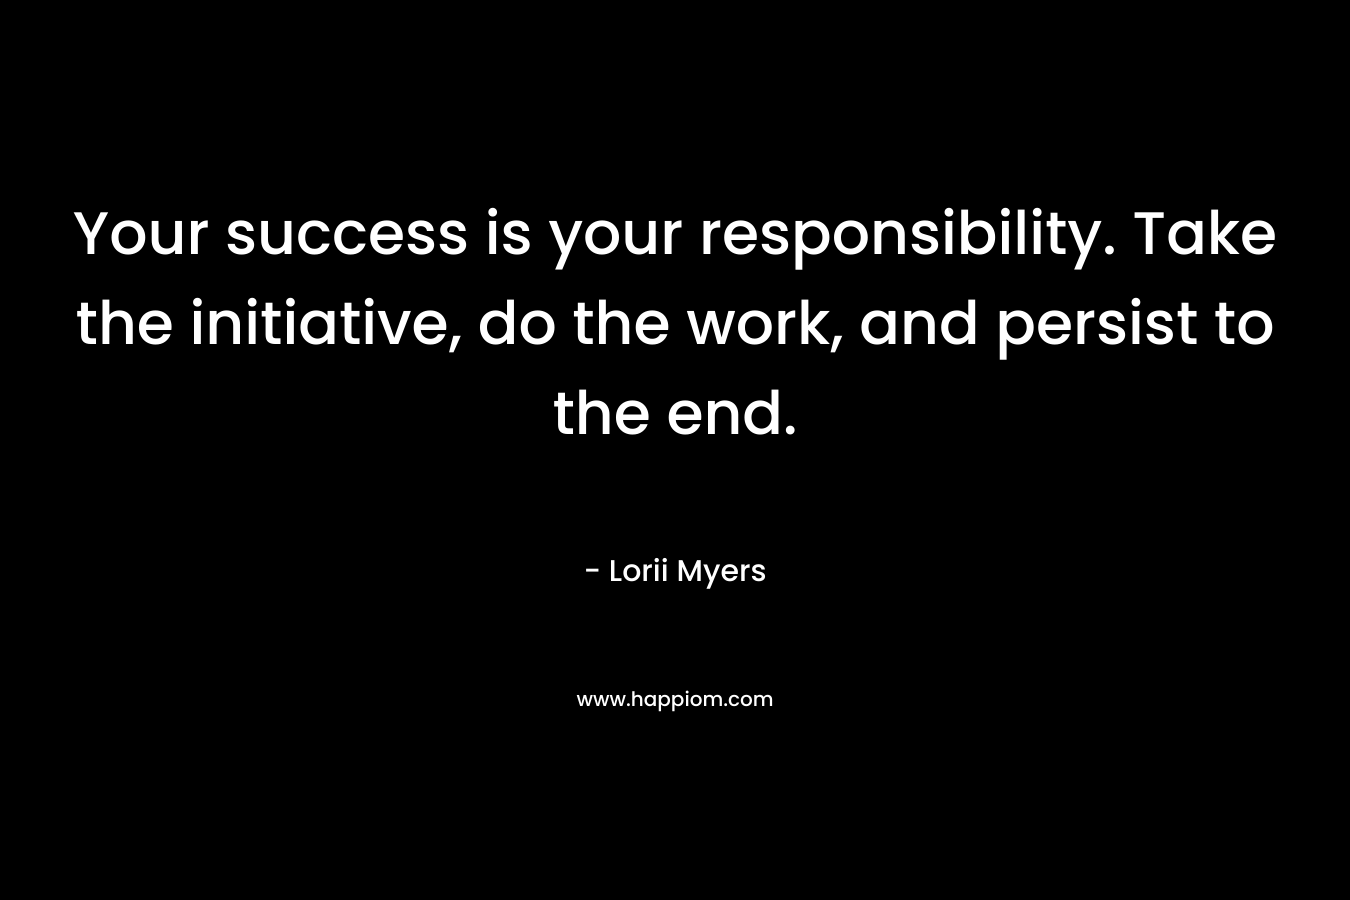 Your success is your responsibility. Take the initiative, do the work, and persist to the end. – Lorii Myers